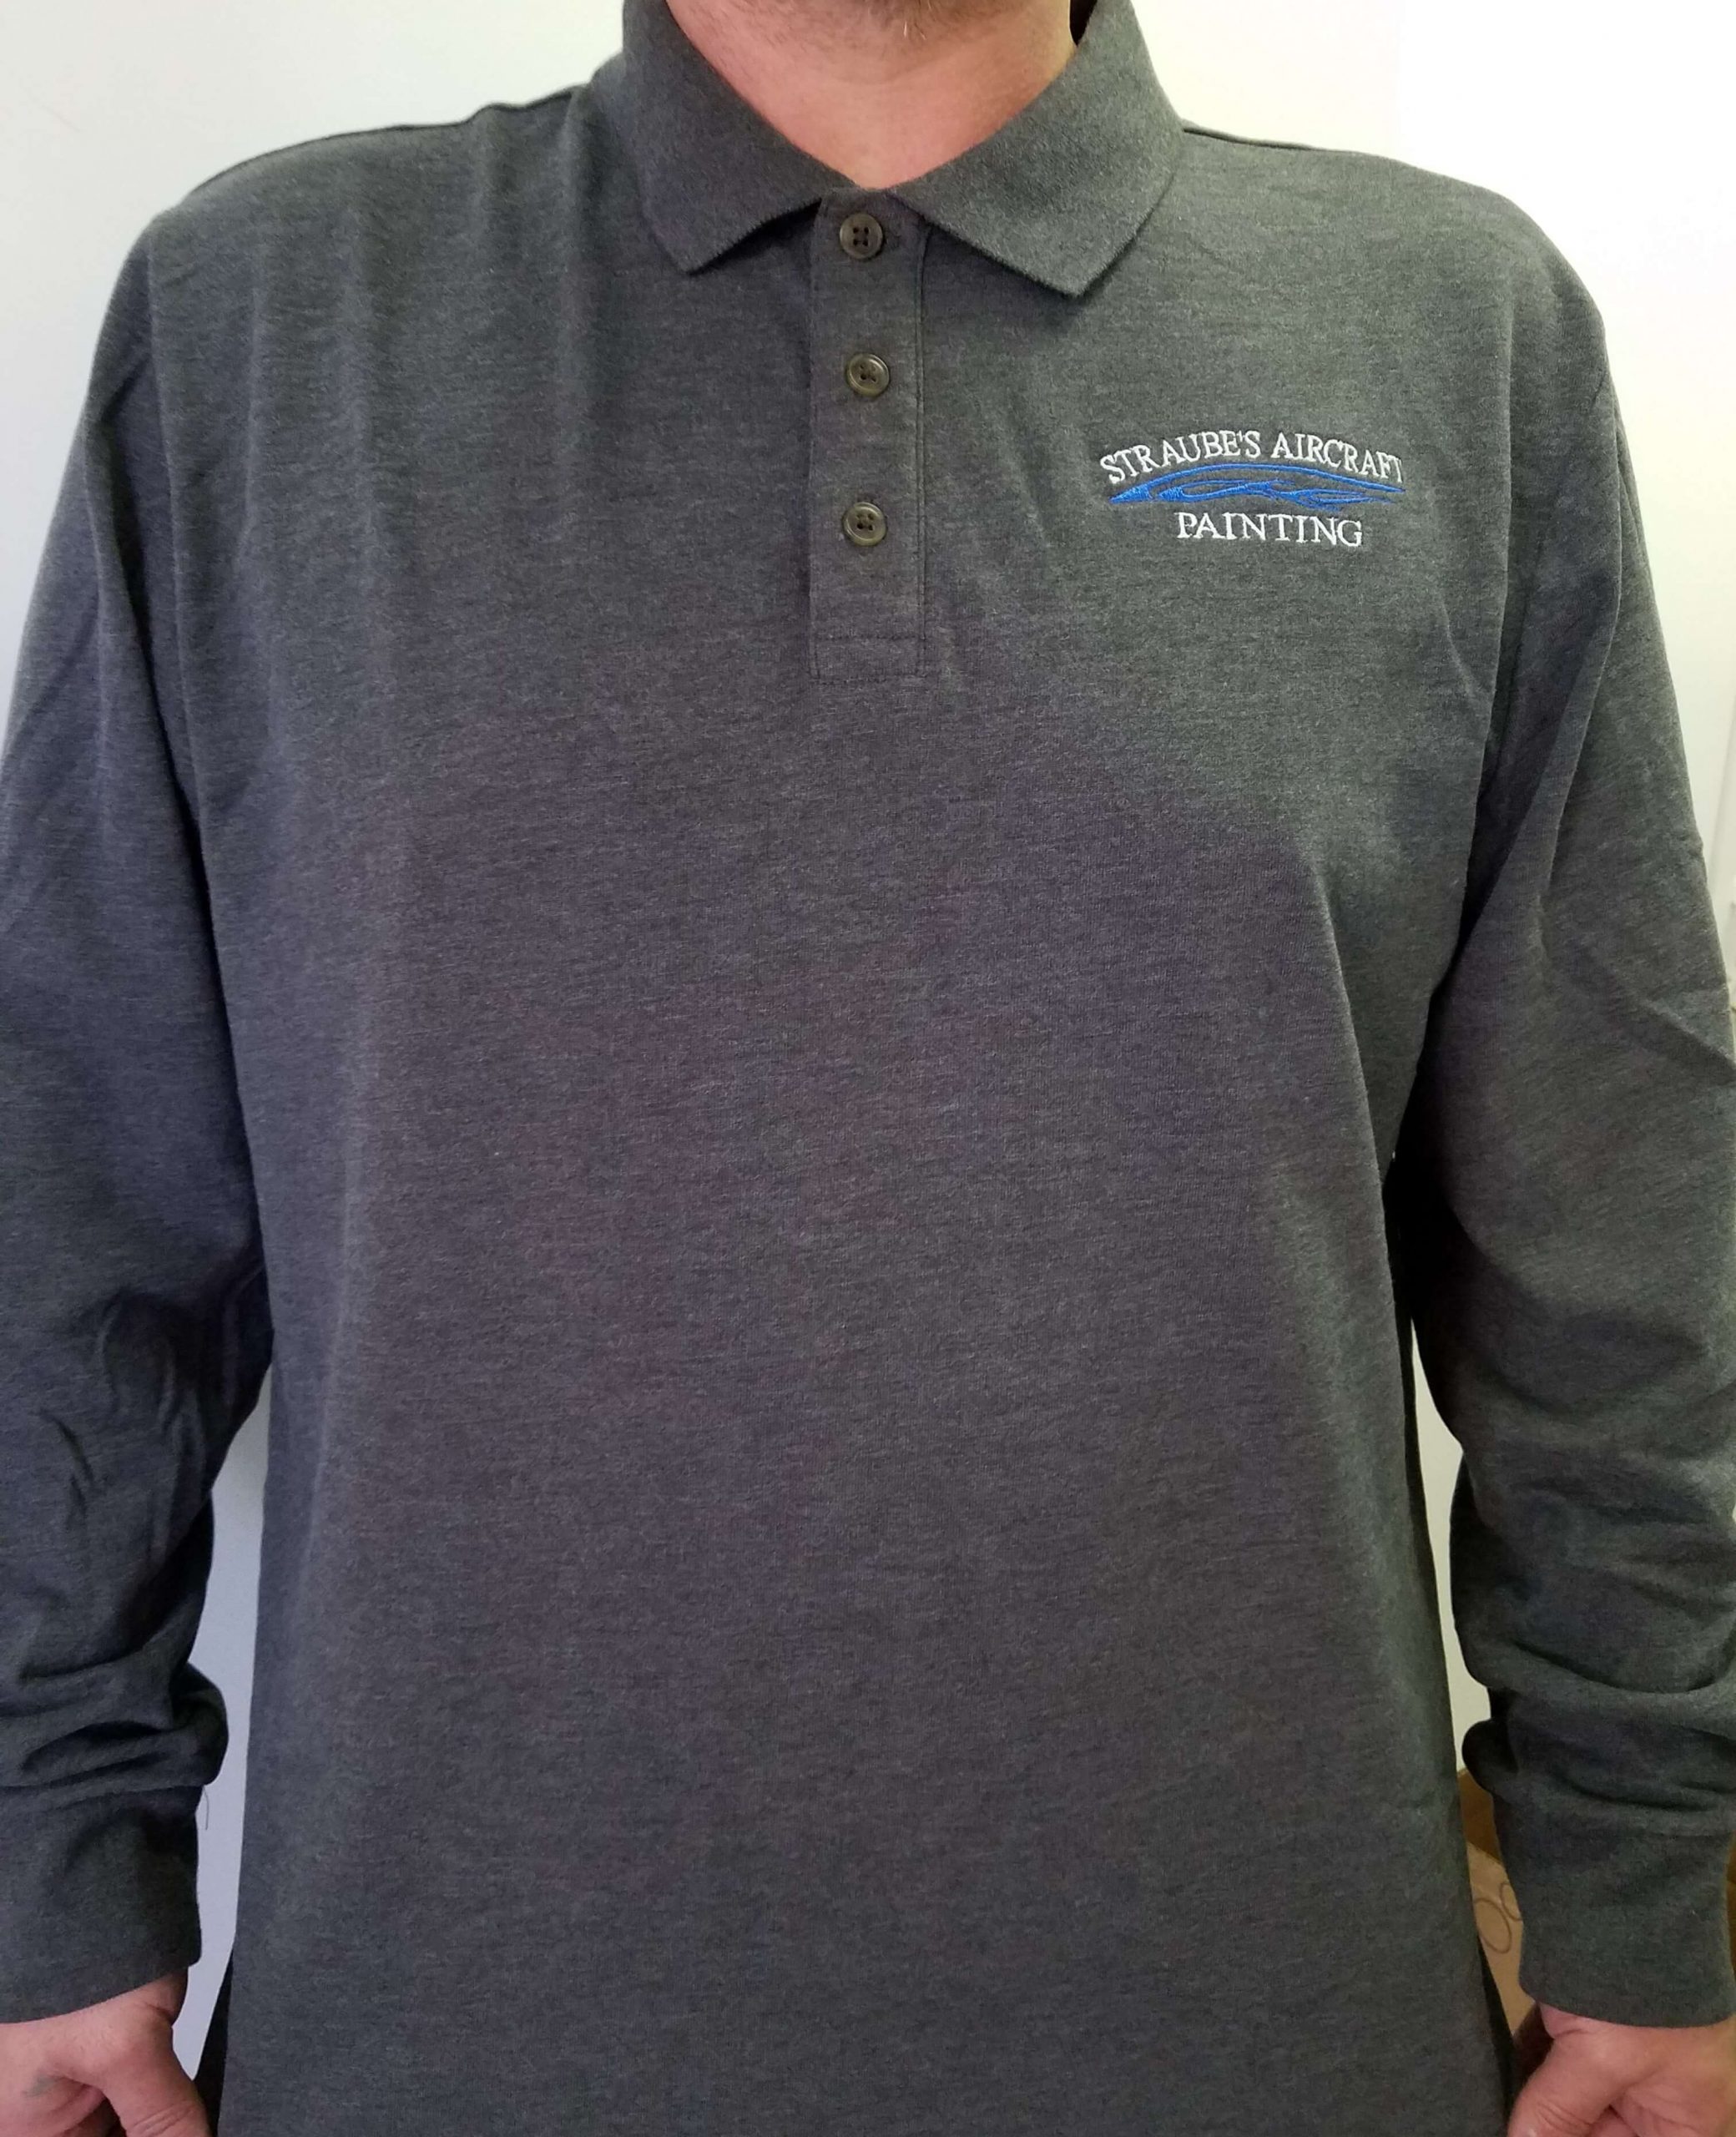 Limited -St. Johns Bay Long Sleeve Polos - Straube's Aircraft Services ...